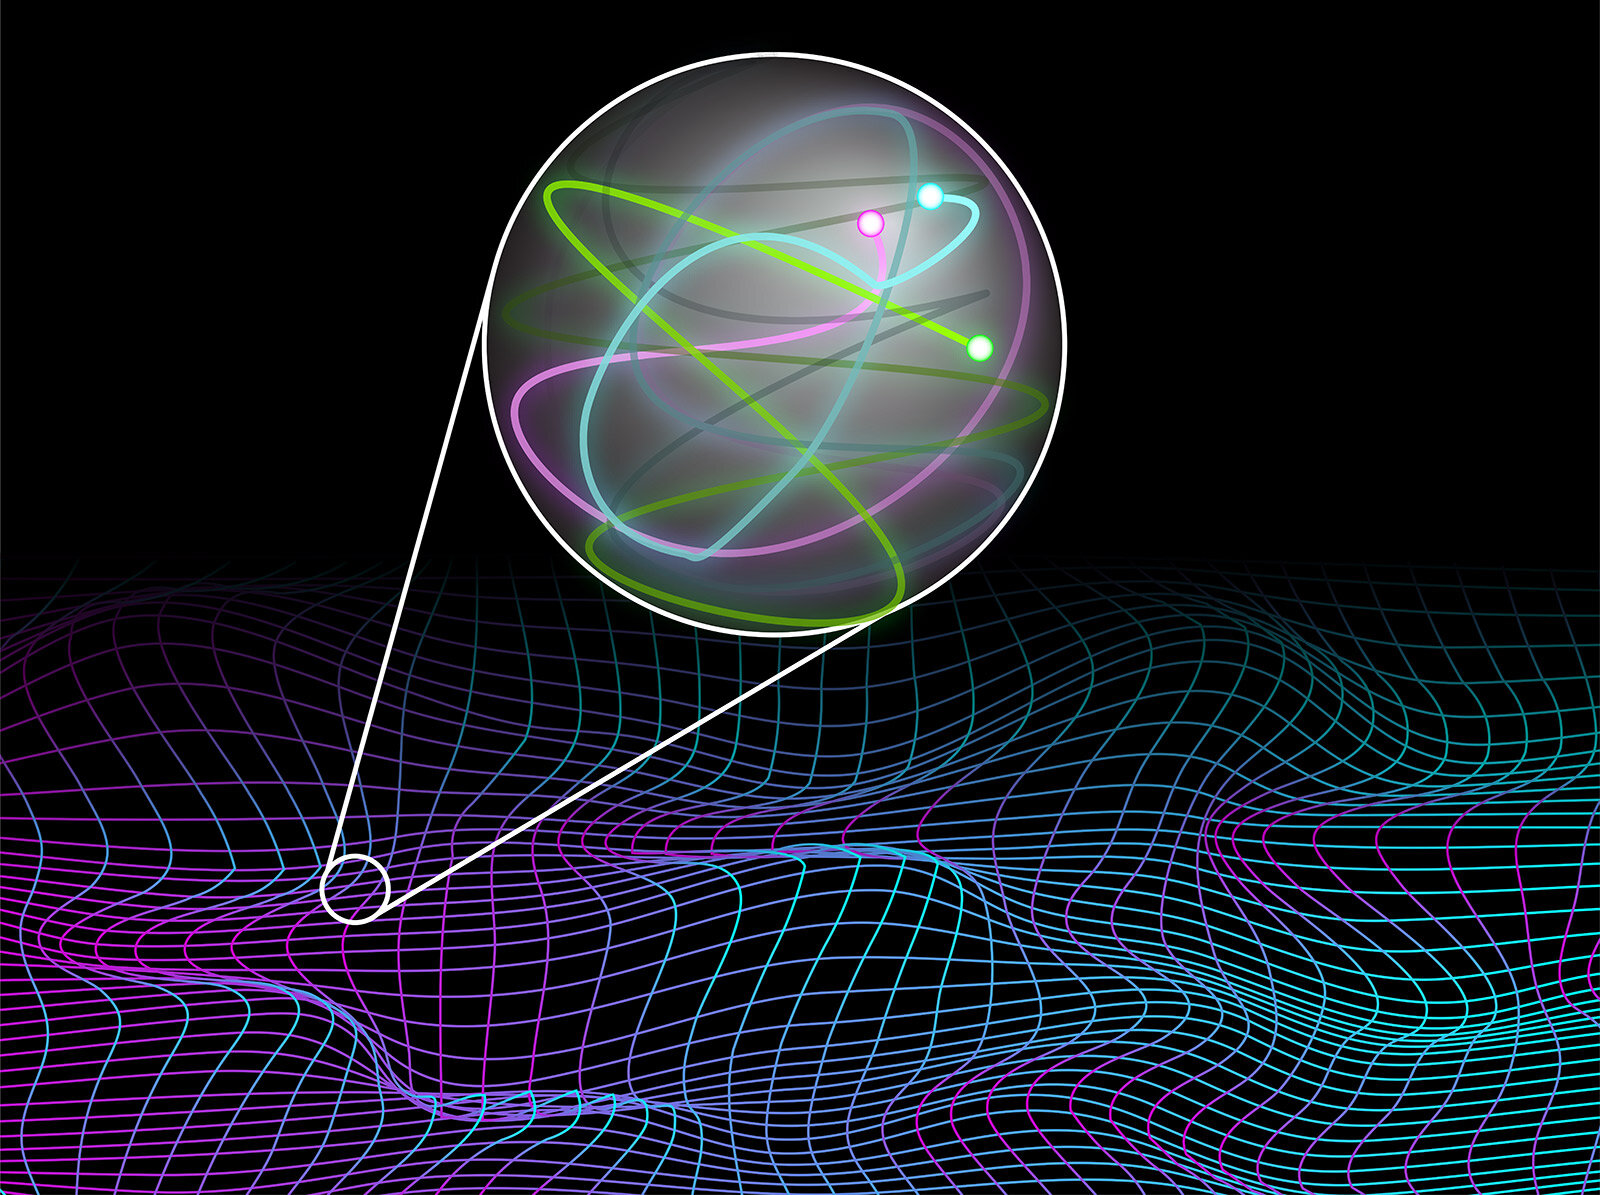 Randomness in quantum machines helps verify their accuracy